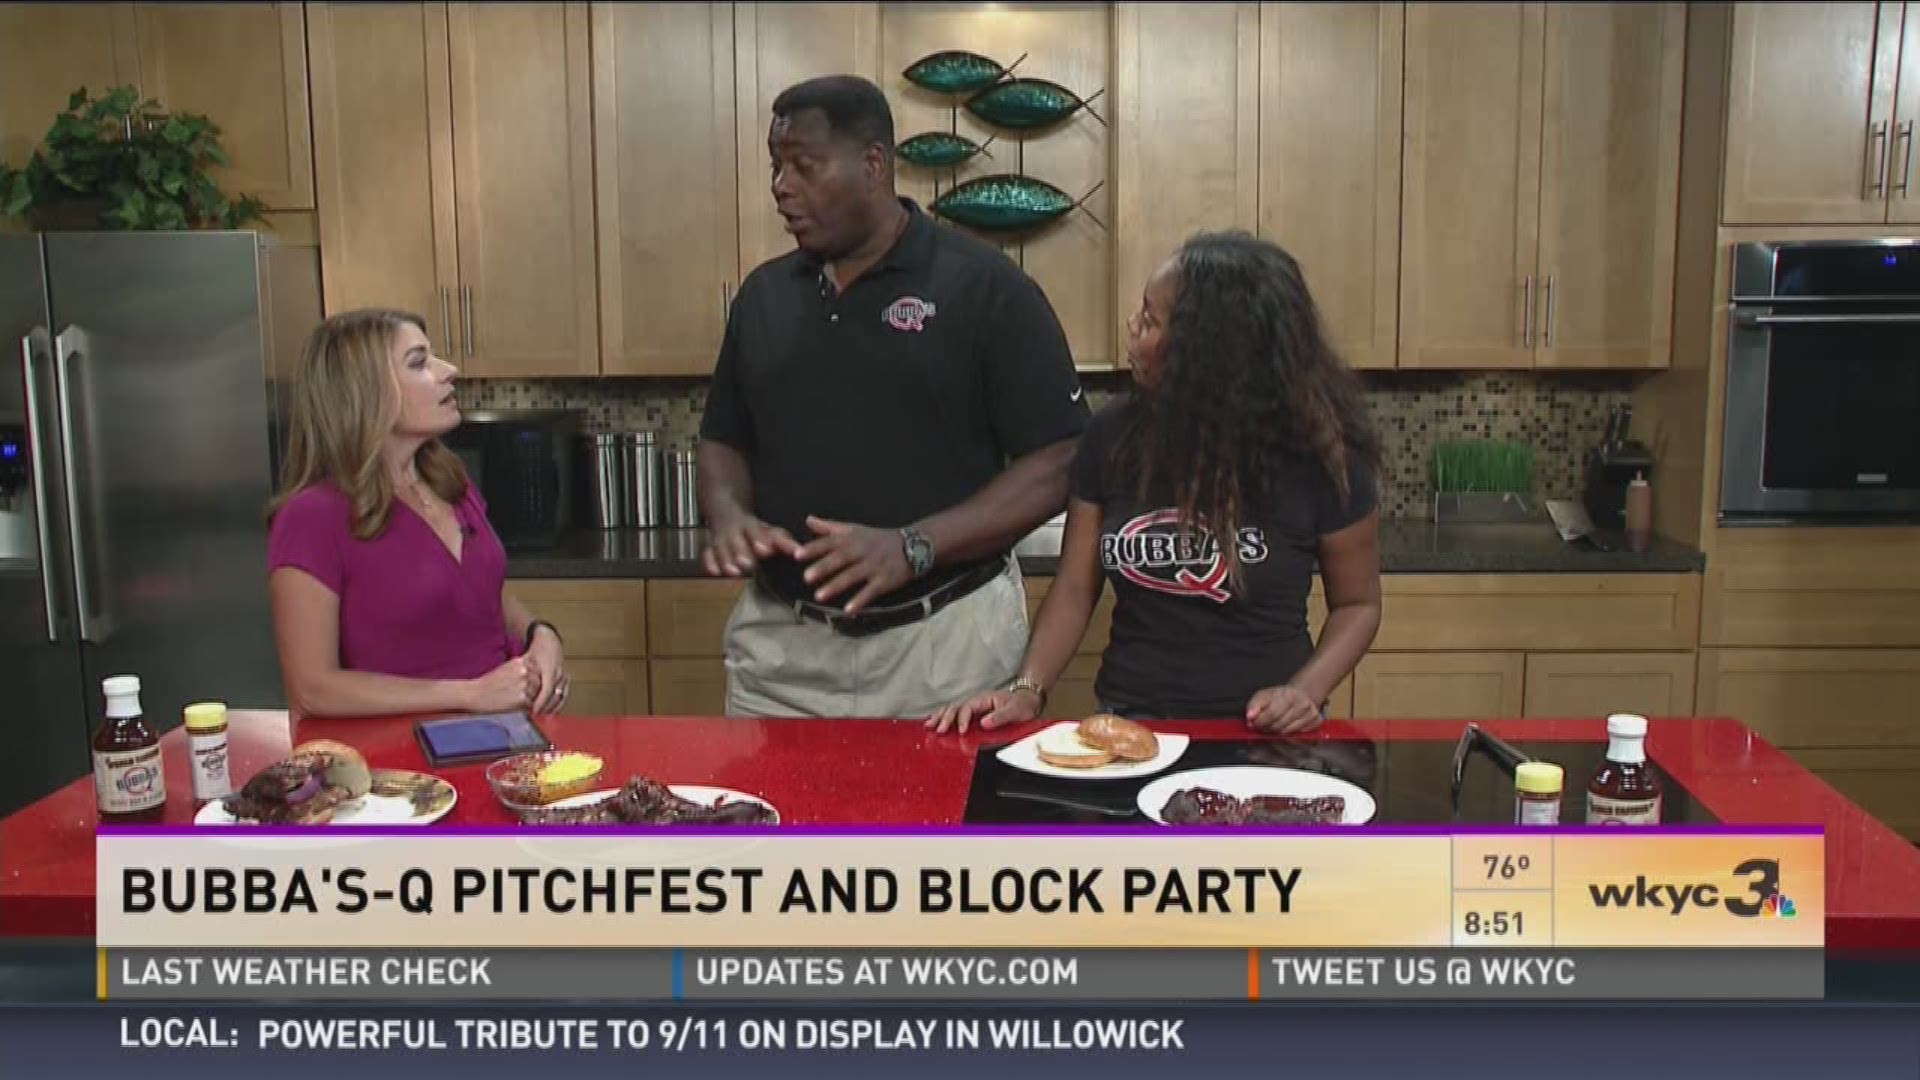 Bubba's Q Pitchfest and Block Party